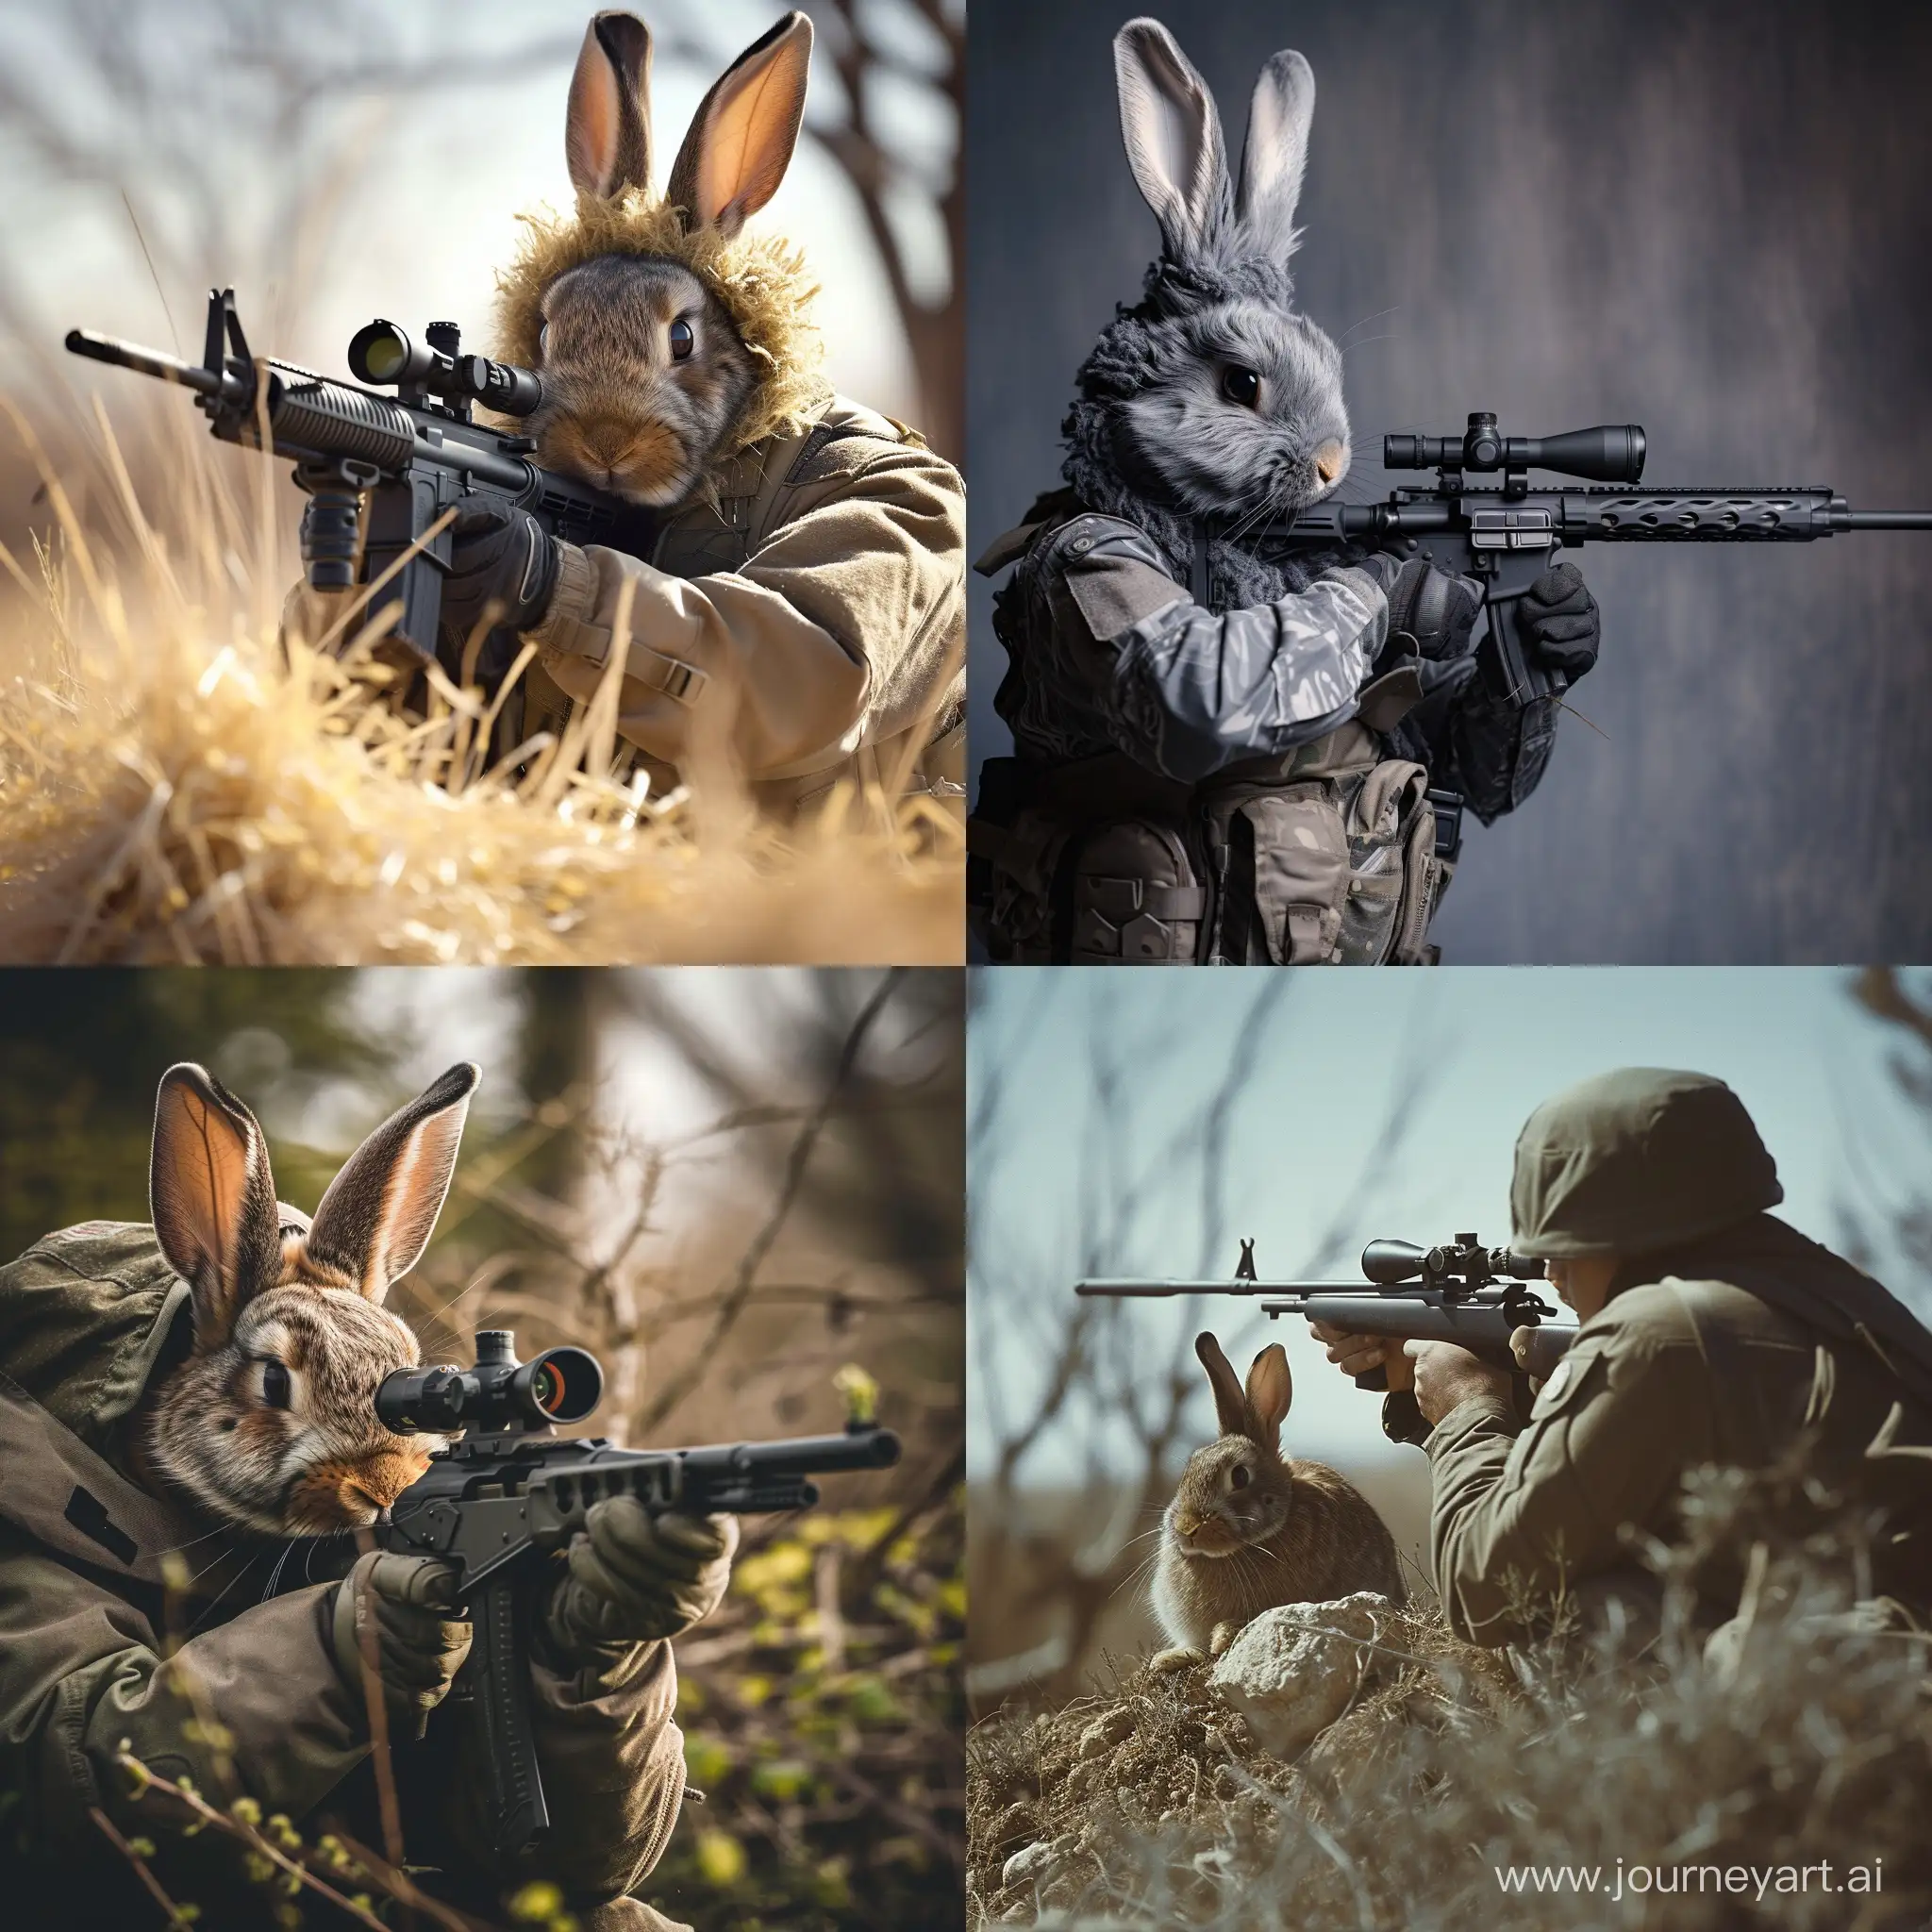 Bunny-Hunter-with-Rifle-in-Vivid-Artistic-Composition